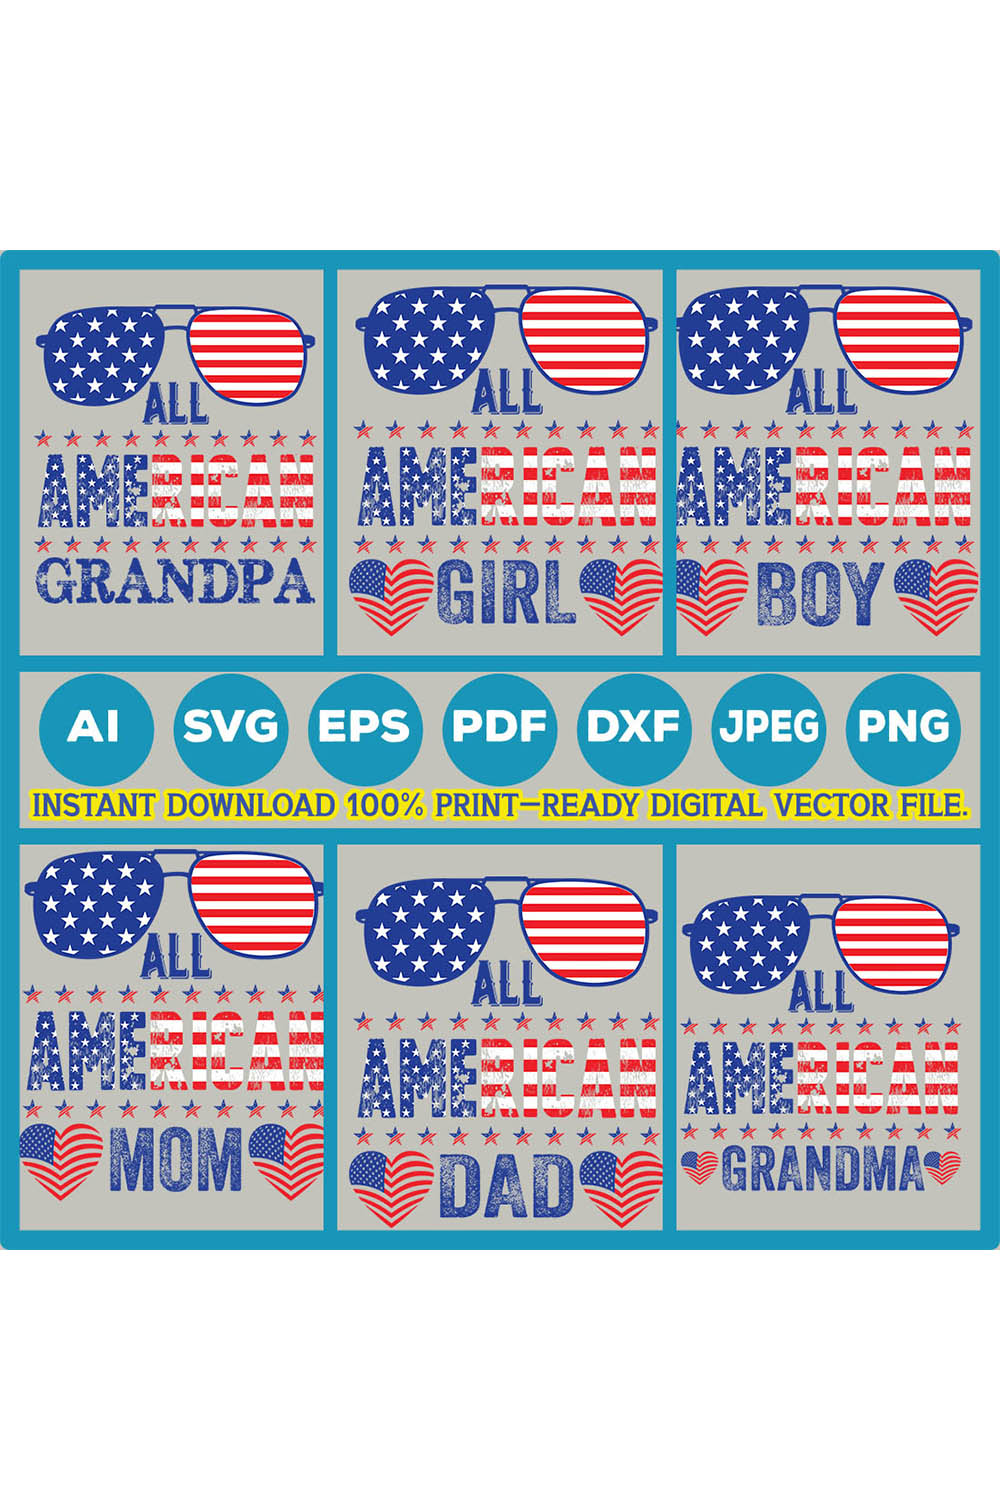 4th July All American Sublimation the Heart of the Family Quotes Bundle Vintage Typography Retro Svg Bundle T-Shirt Design Happy M4th July All American Sublimation Love is the Heart of the Family, It's All About Happy Mother Day Vintage Typography Retro Tshirt Design | Ai, Svg, Eps, Dxf, PDF, Jpeg, Png, Instant download Digital File T-Shirt Design | 100% print-ready Digital vector file pinterest preview image.